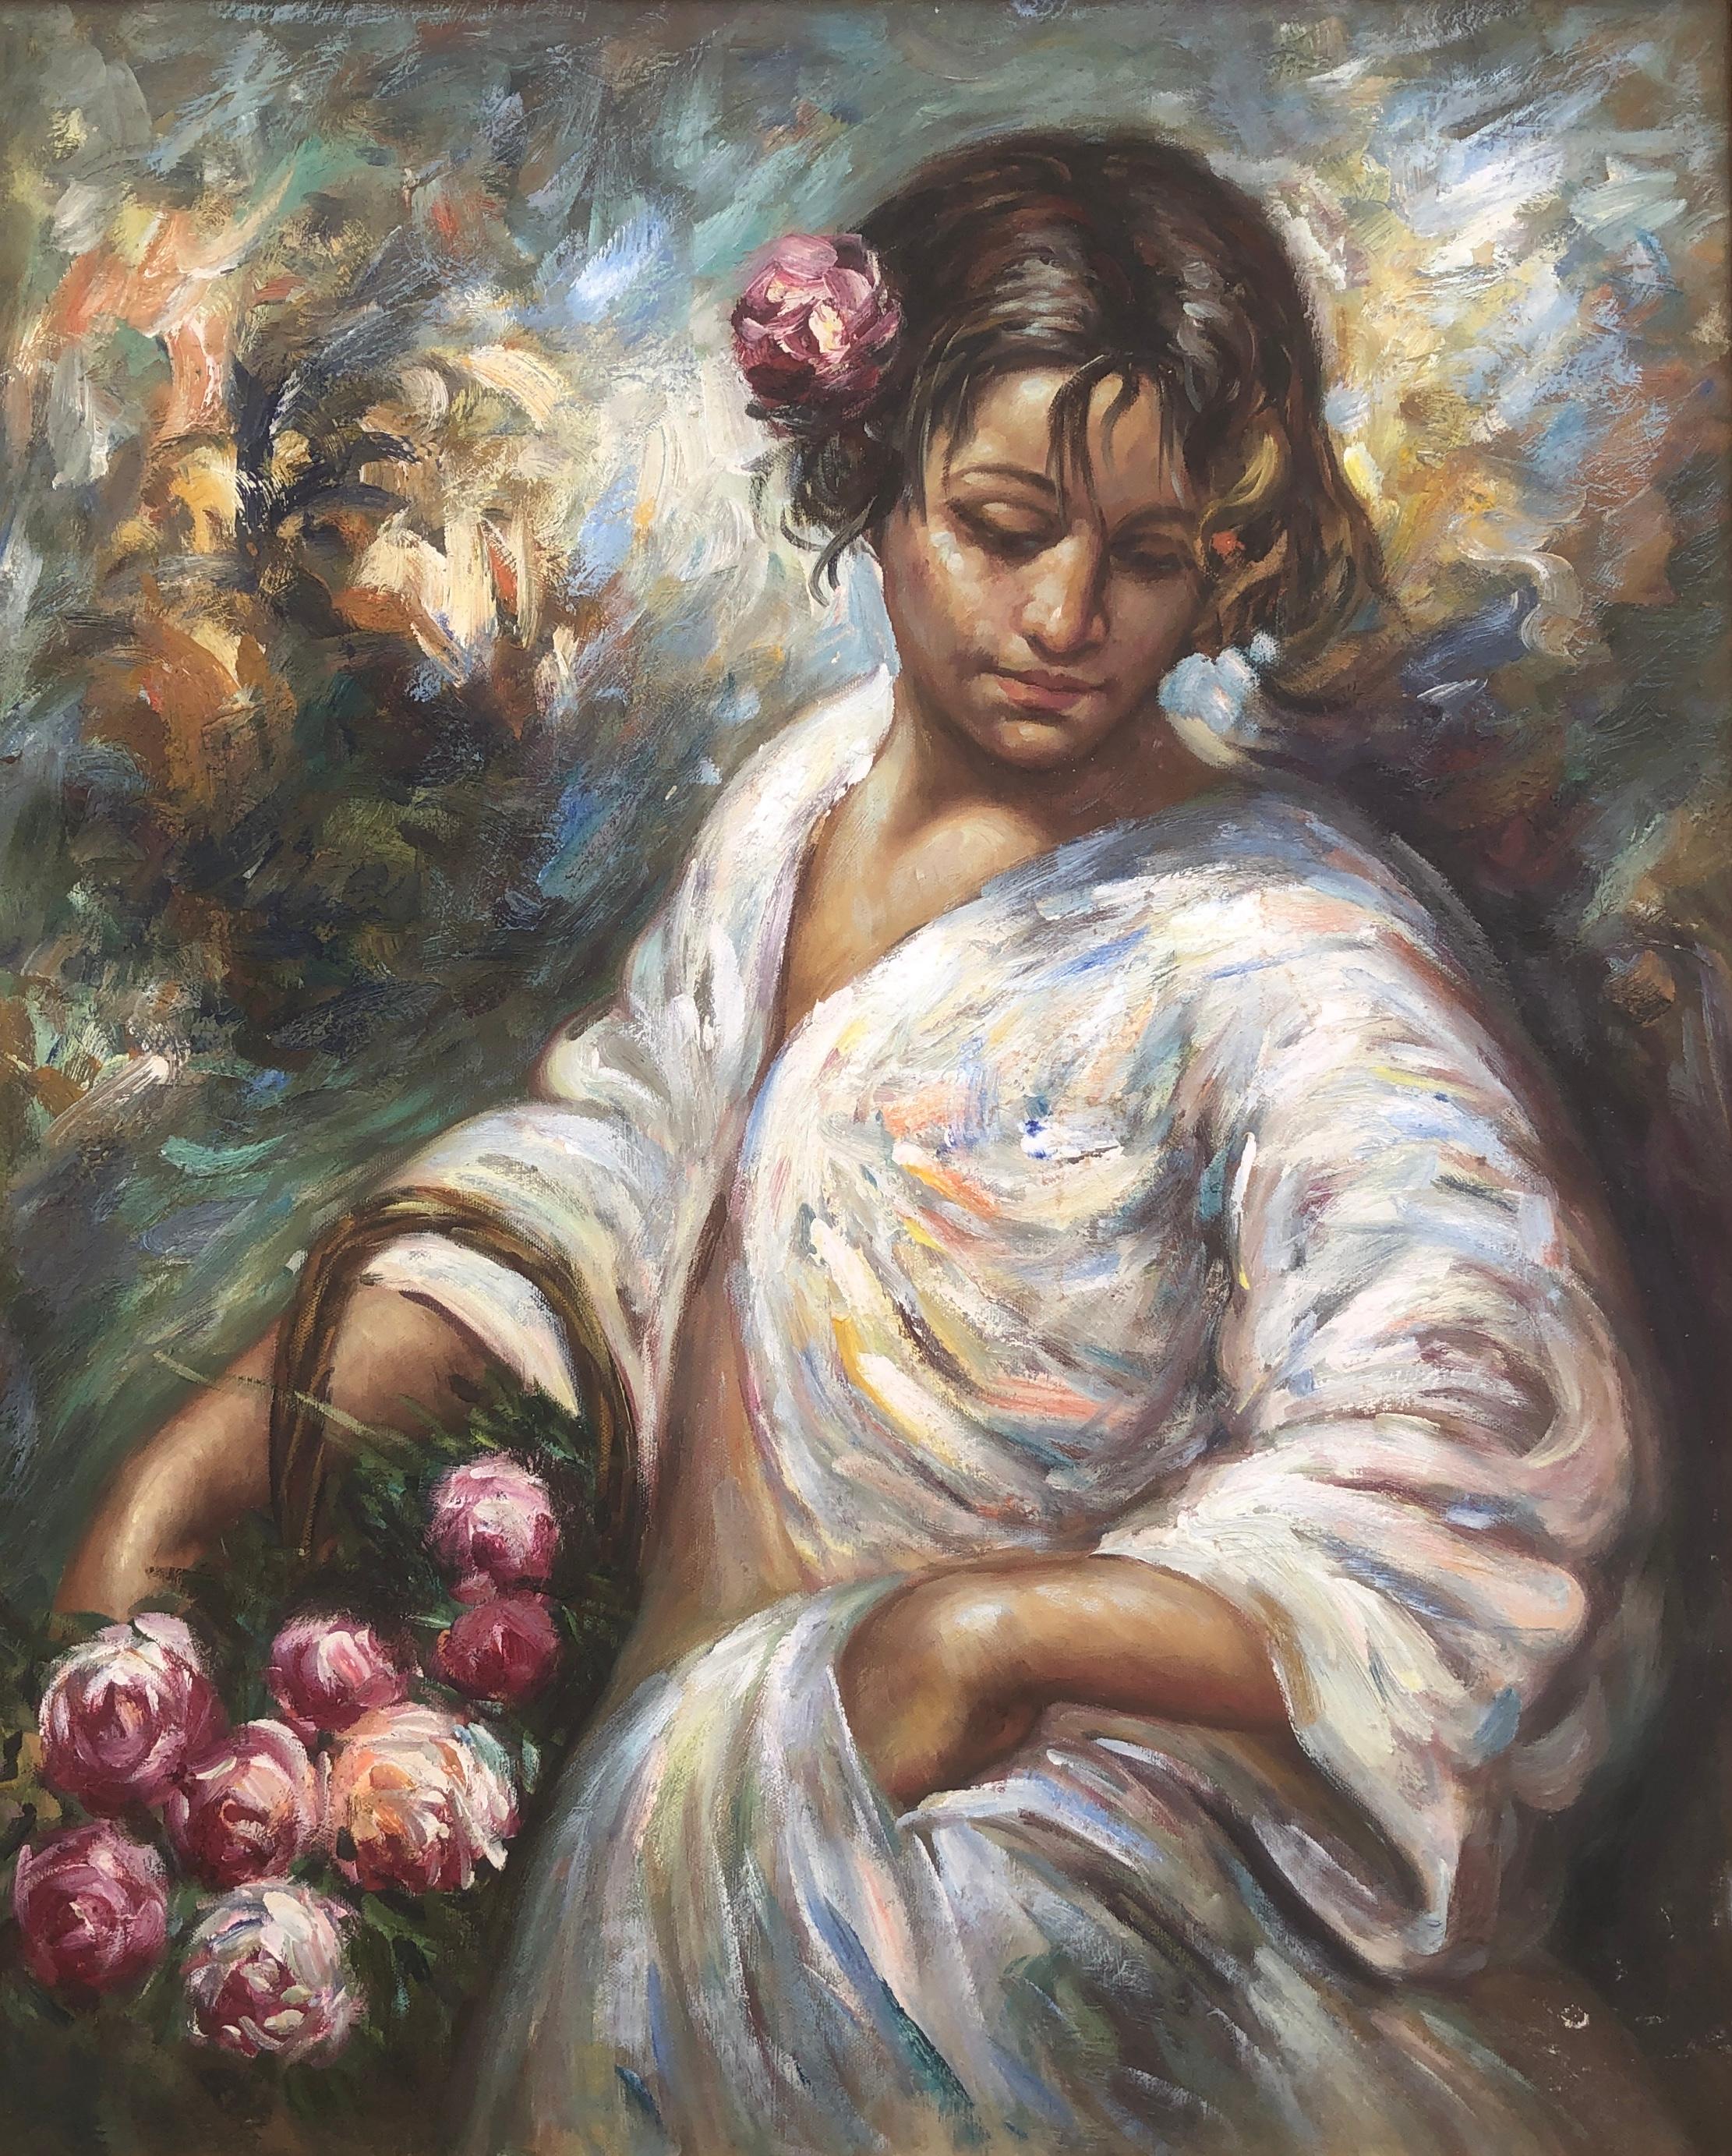 José Royo Portrait Painting - young woman with basket of flowers oil on canvas painting